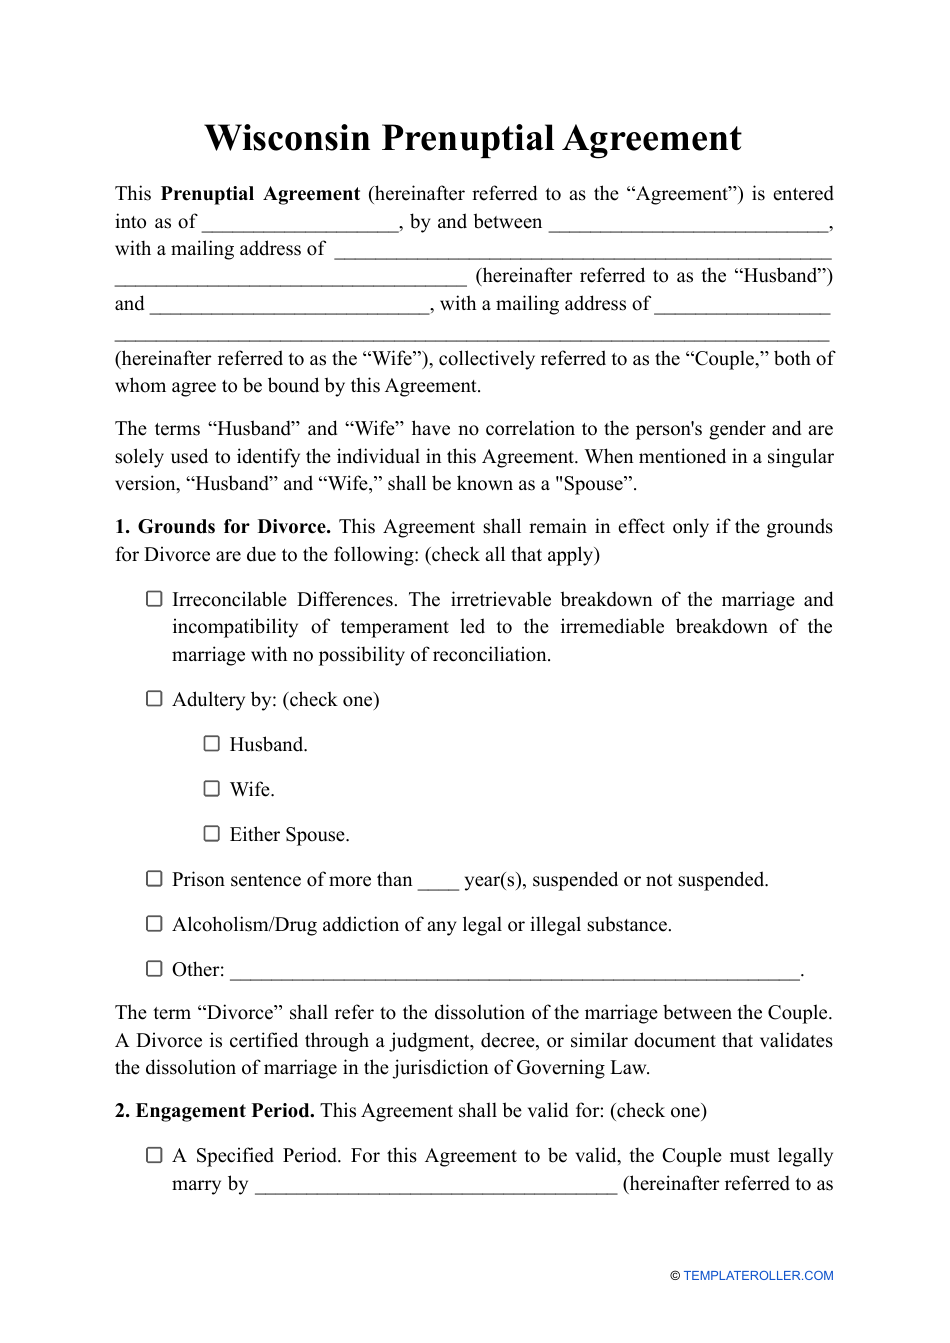 Prenuptial Agreement Template - Wisconsin, Page 1